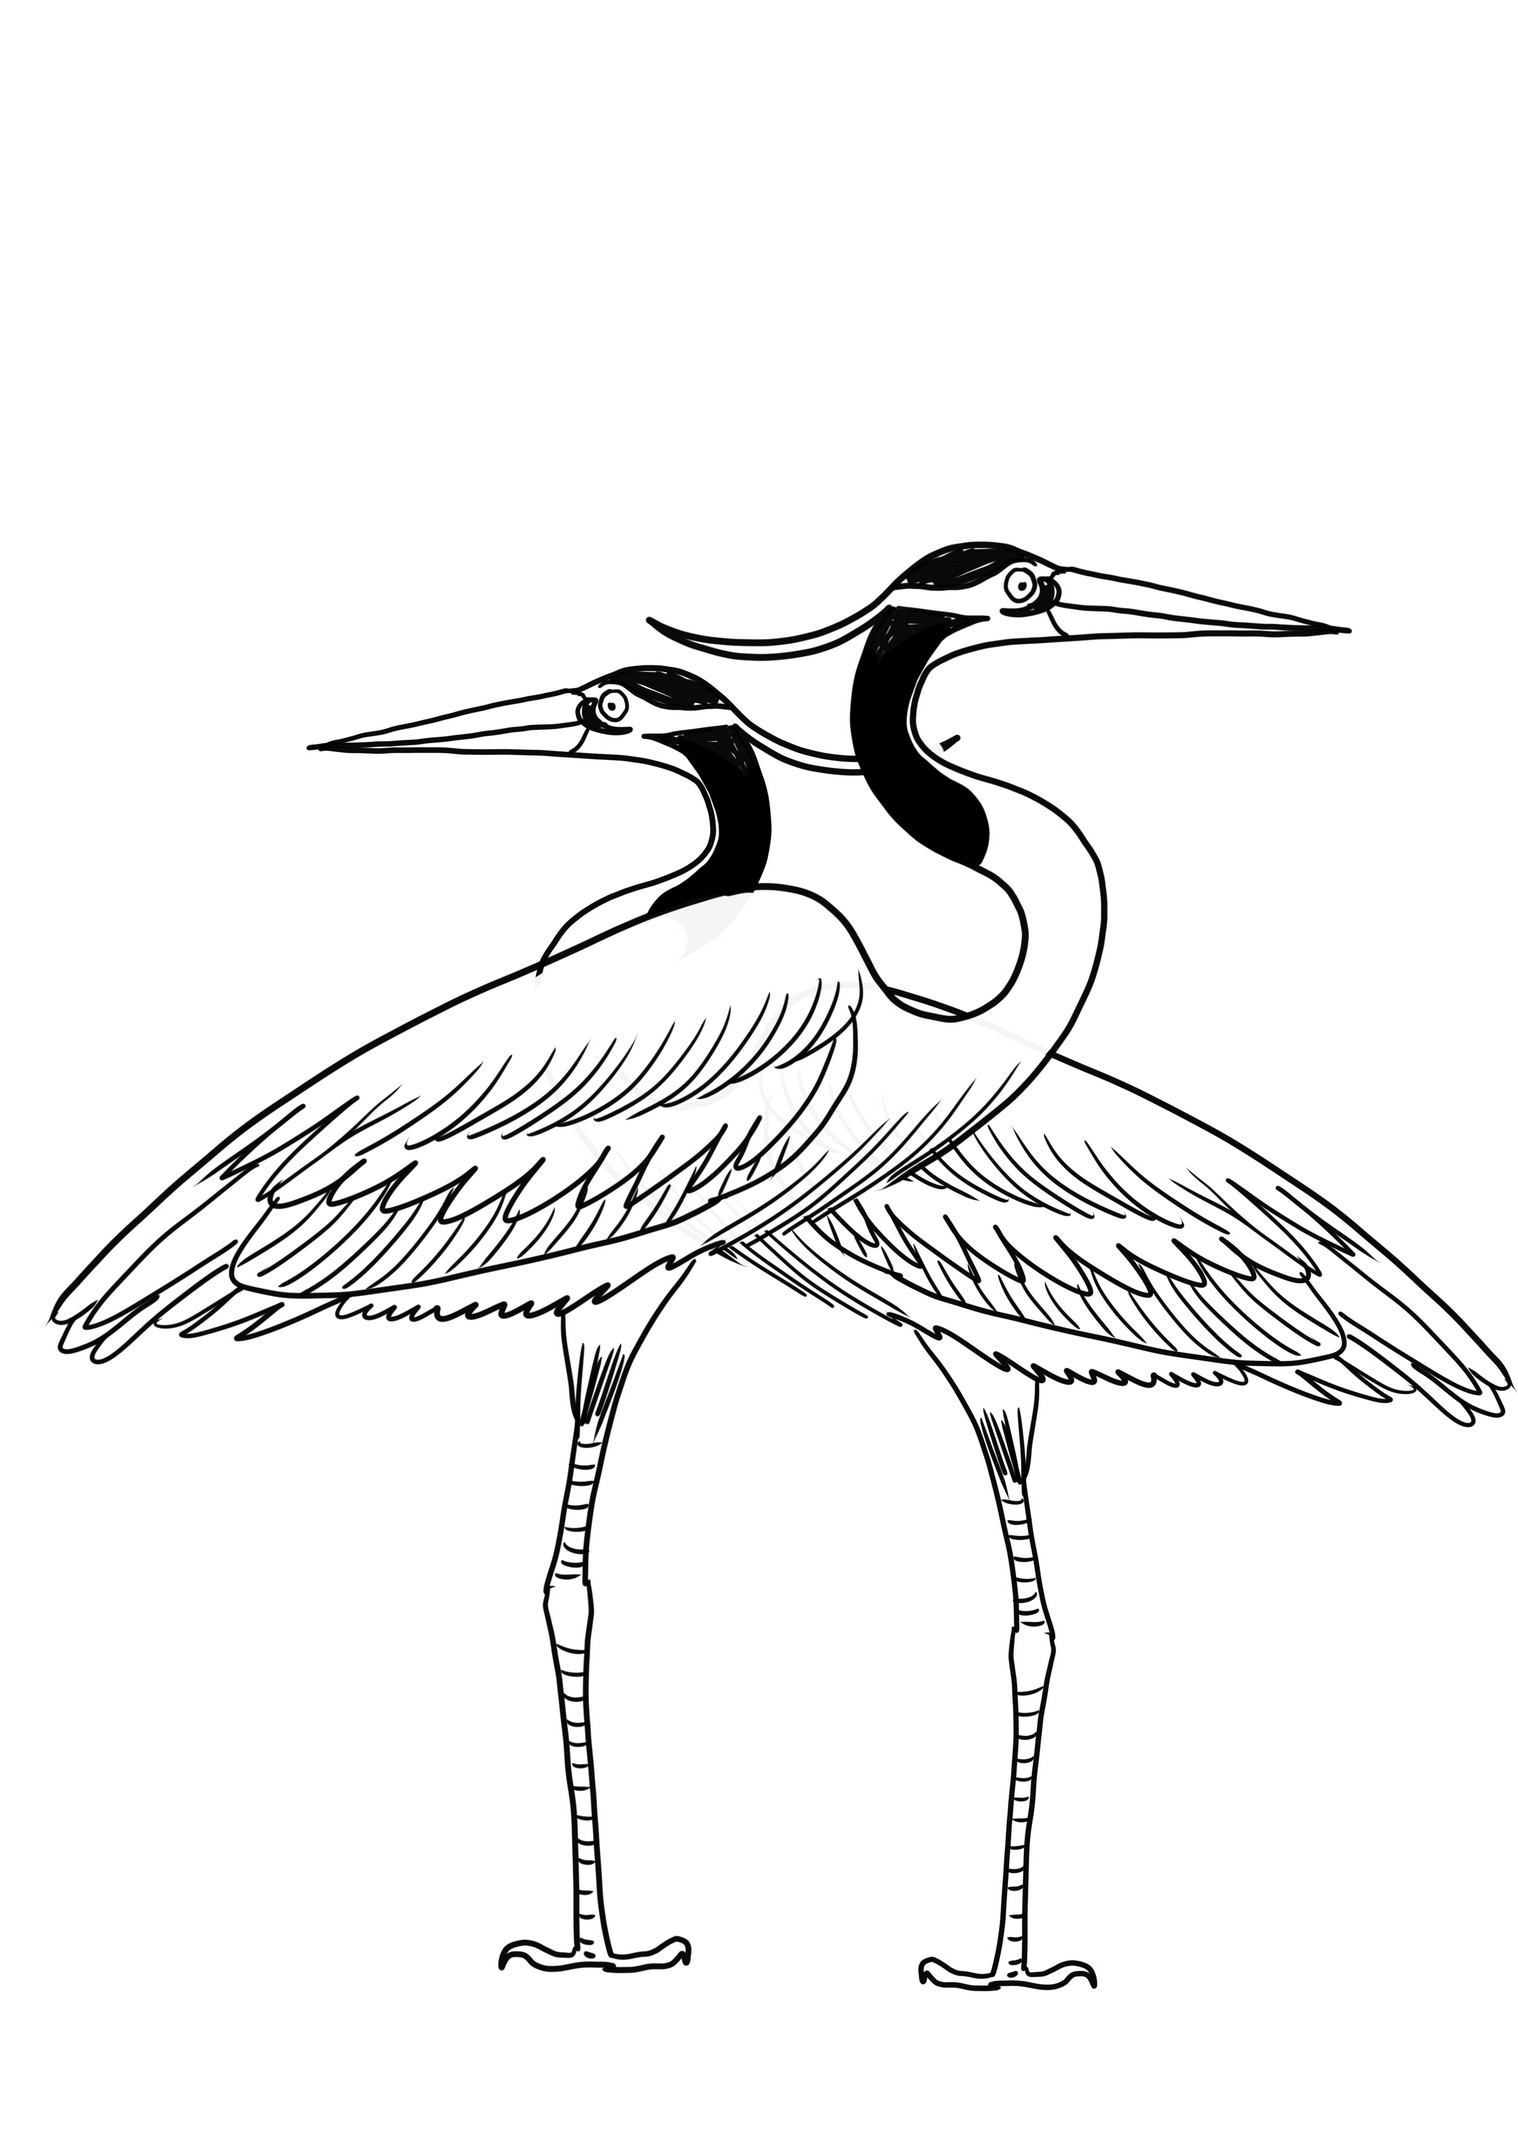 Couple of geese coloring page